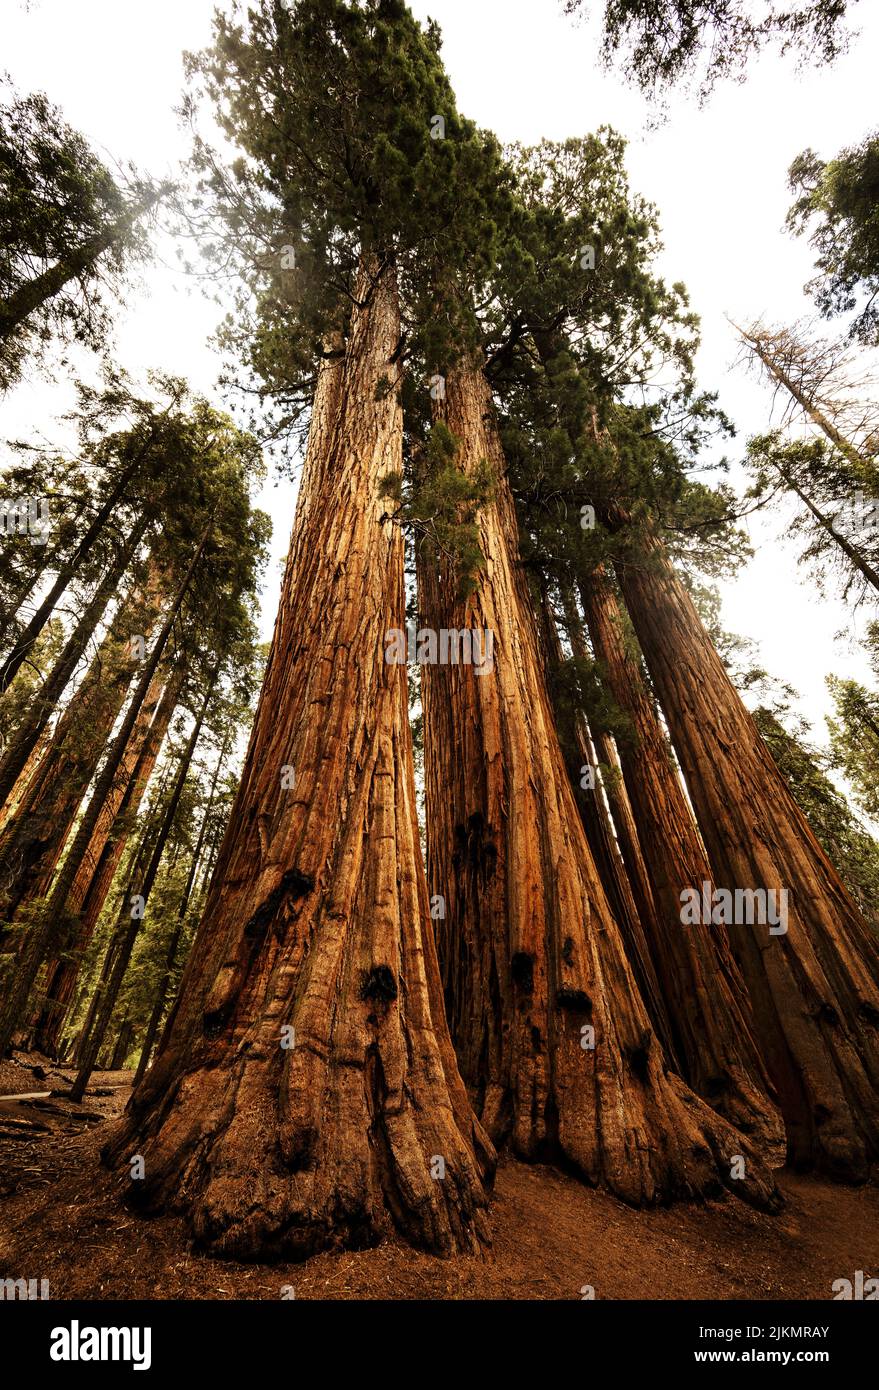 The House is a cluster of giant redwoods located near President in Giant Forest. In July 1922, at the suggestion of chief ranger Guy Hopping, Sequoia Stock Photo